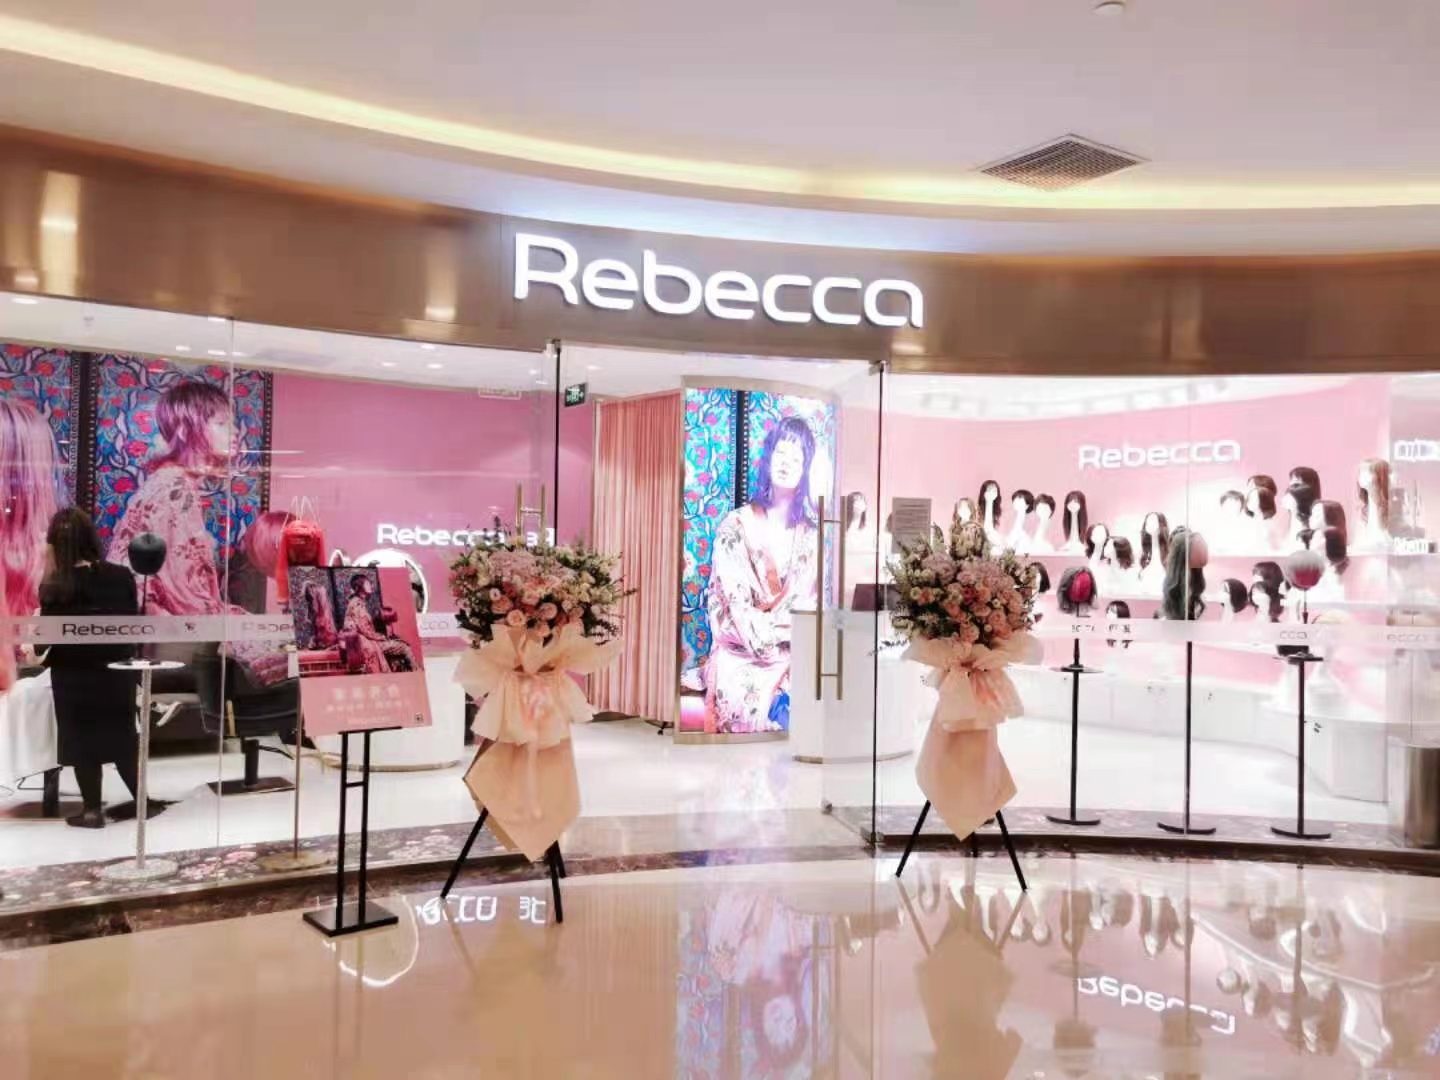 The e-commerce platform has a revenue of 1.05 billion in nine months, and the wig giant Rebecca continues to make its mark